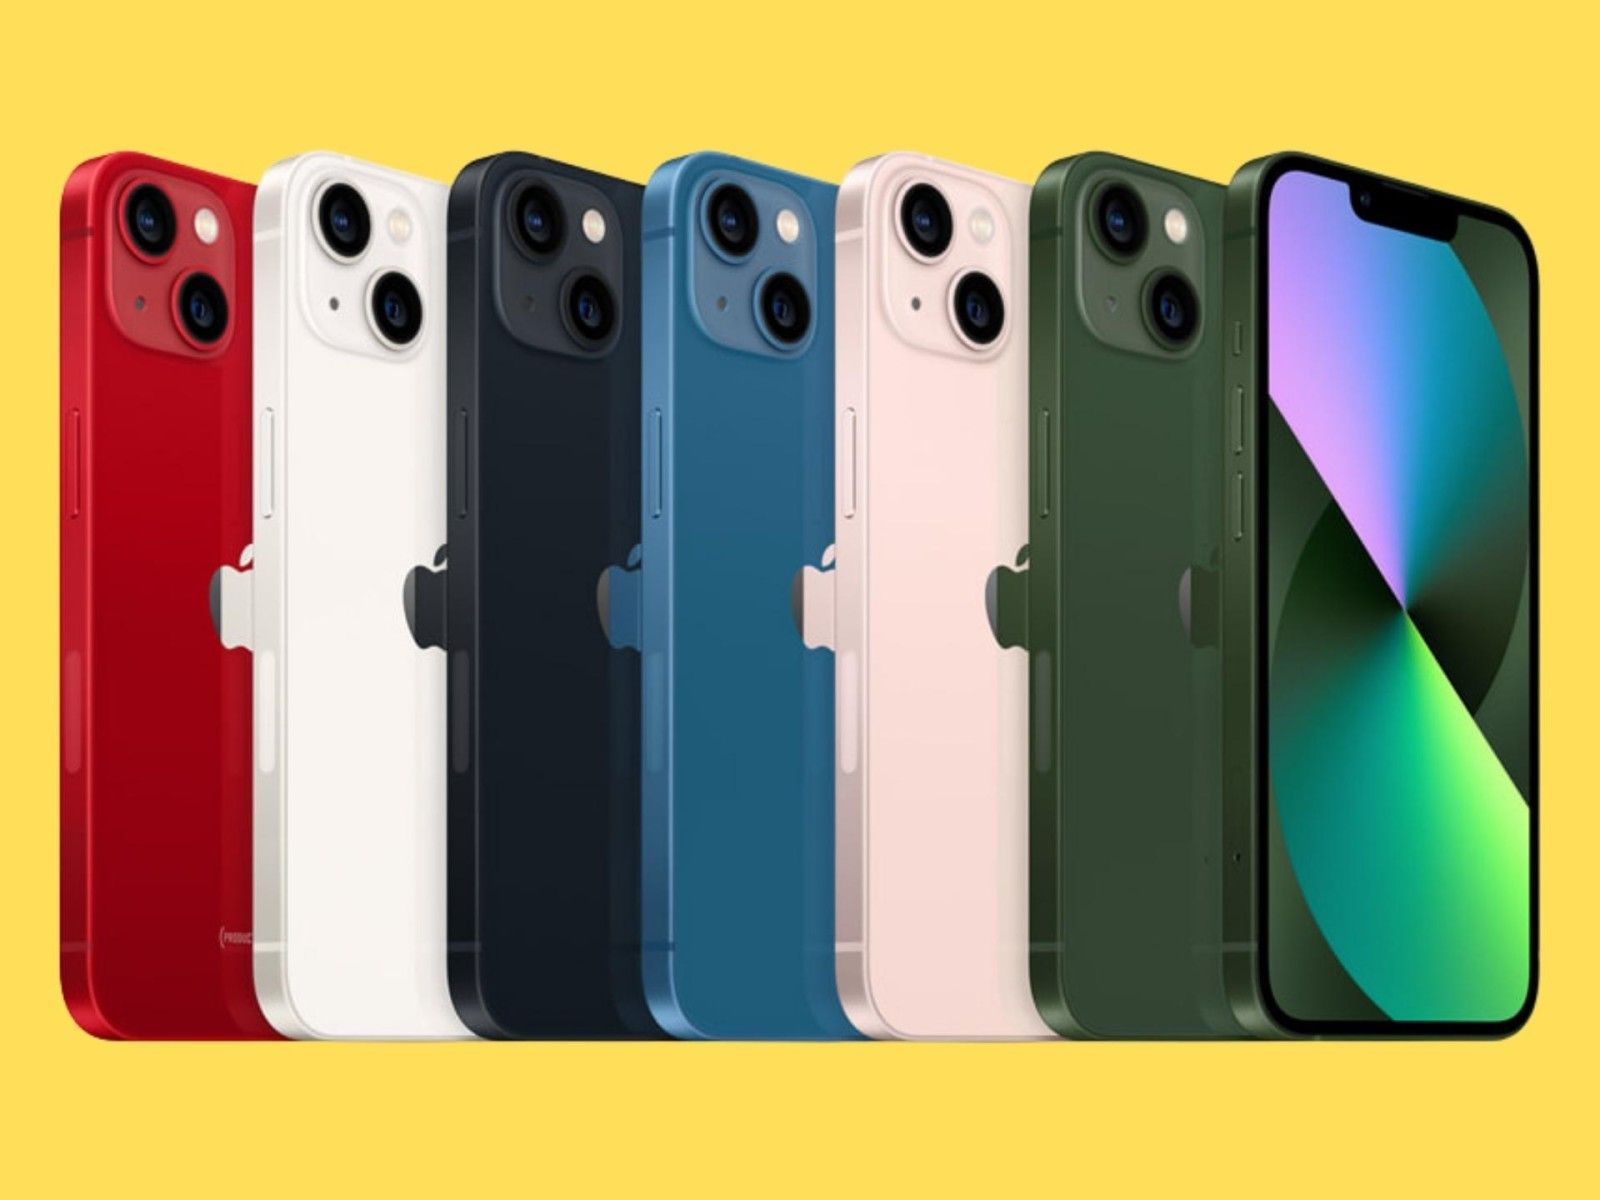 iPhone 13 Colors featuring new Green